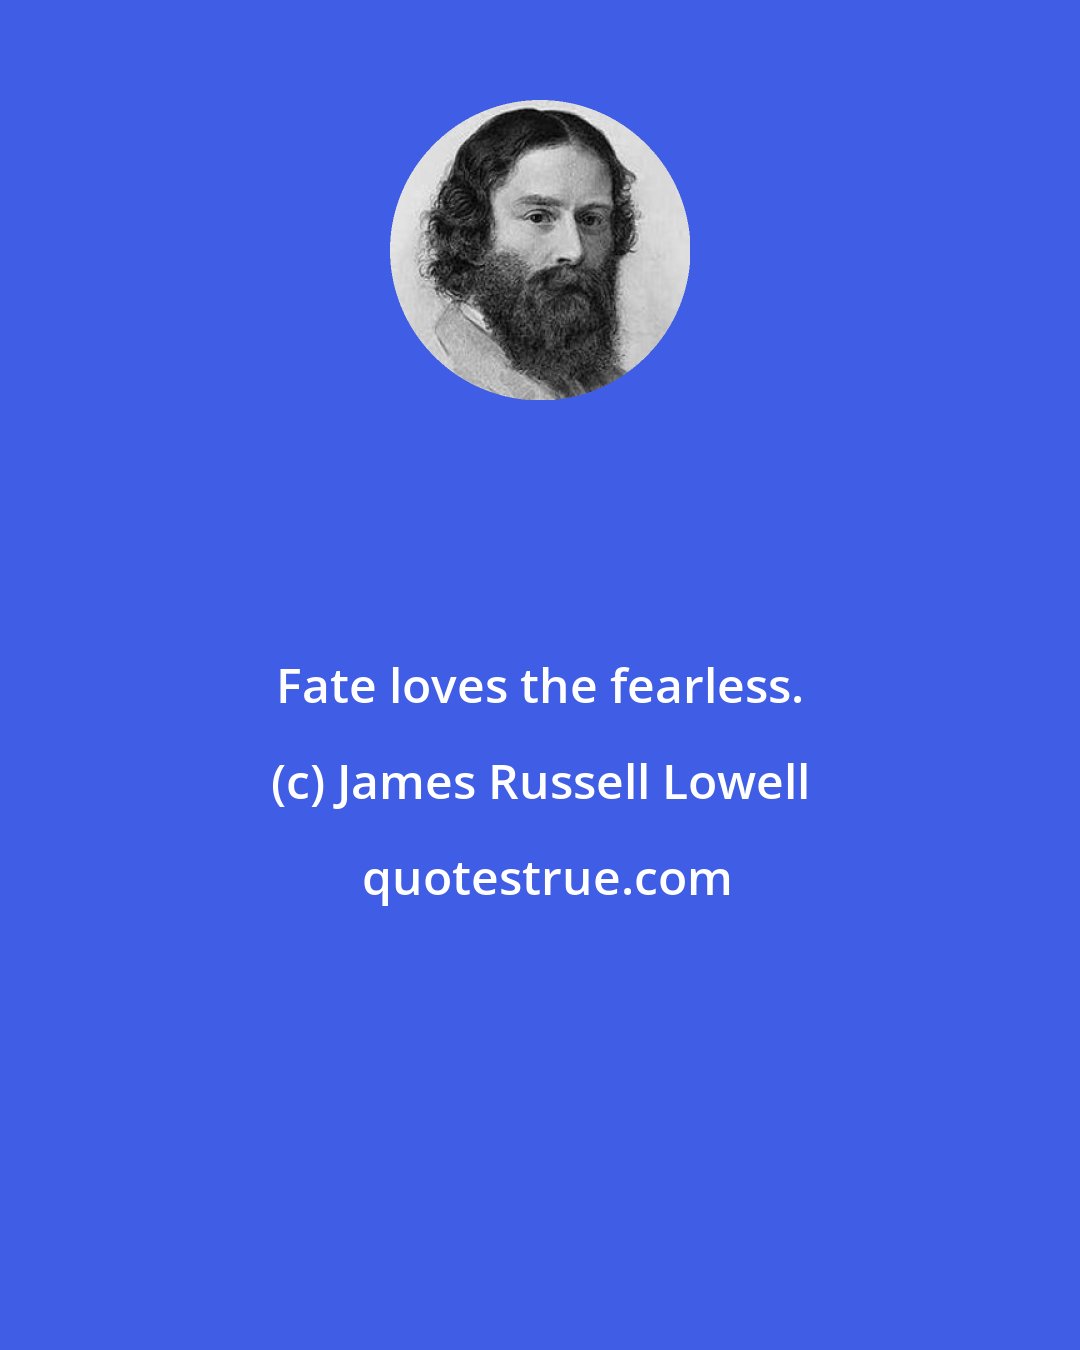 James Russell Lowell: Fate loves the fearless.